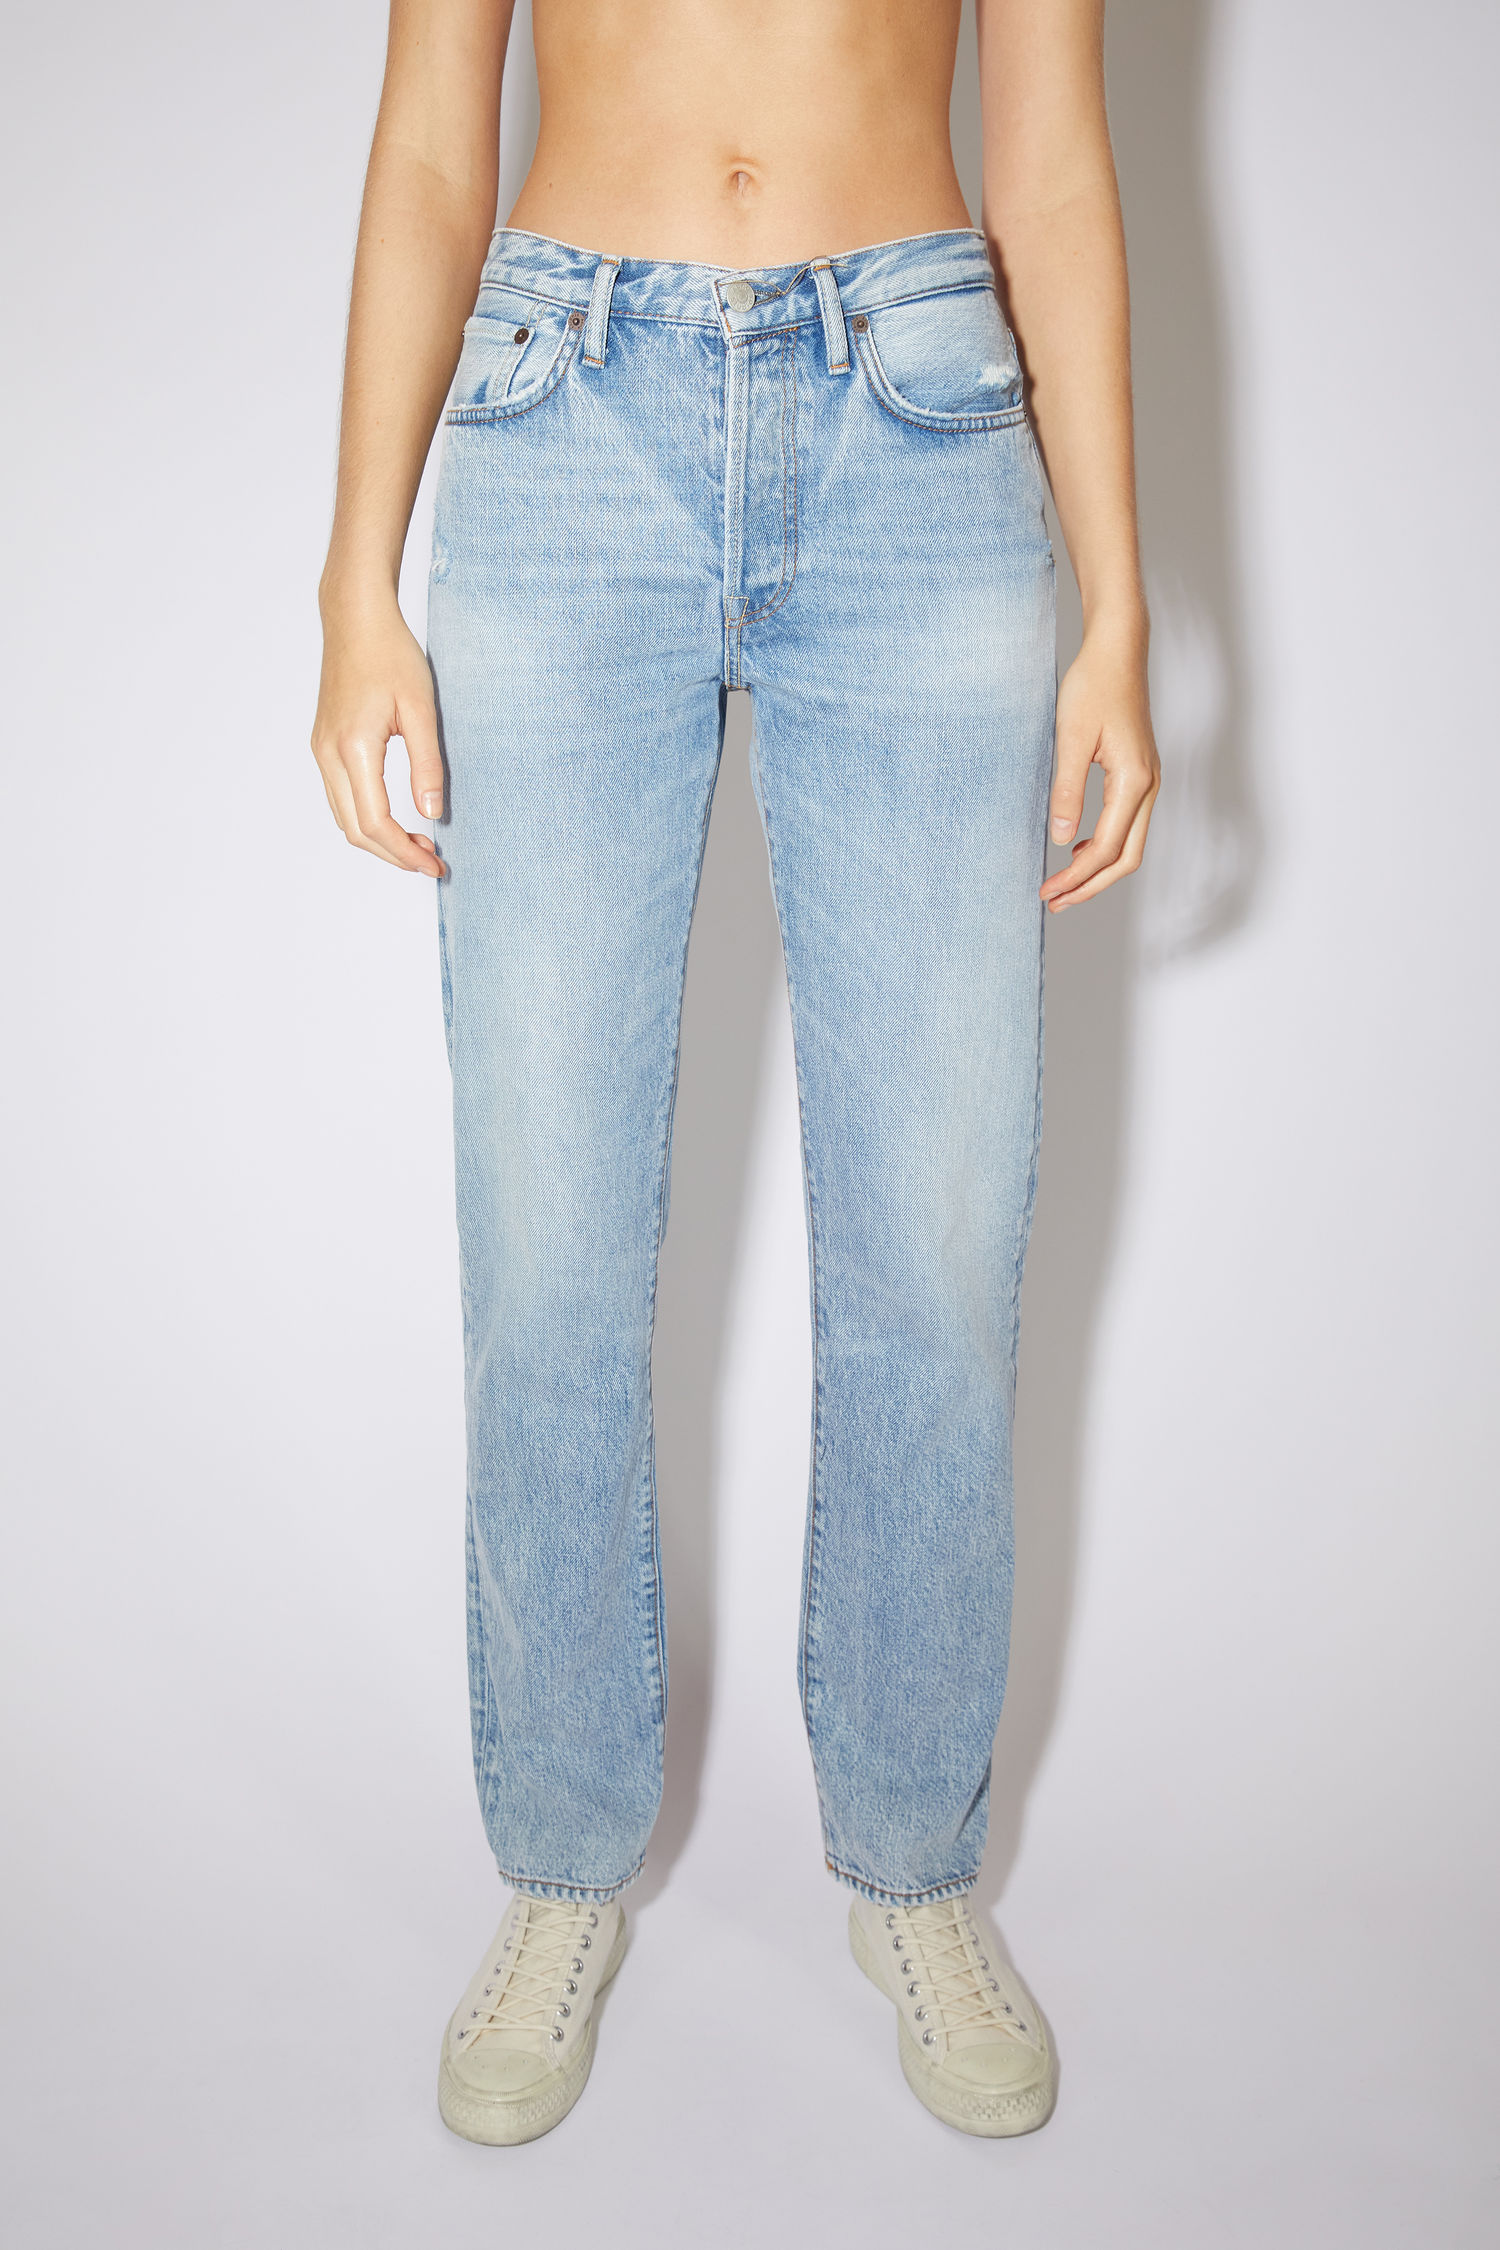 forord malm ulovlig Acne Studios - Straight fit jeans - Light blue